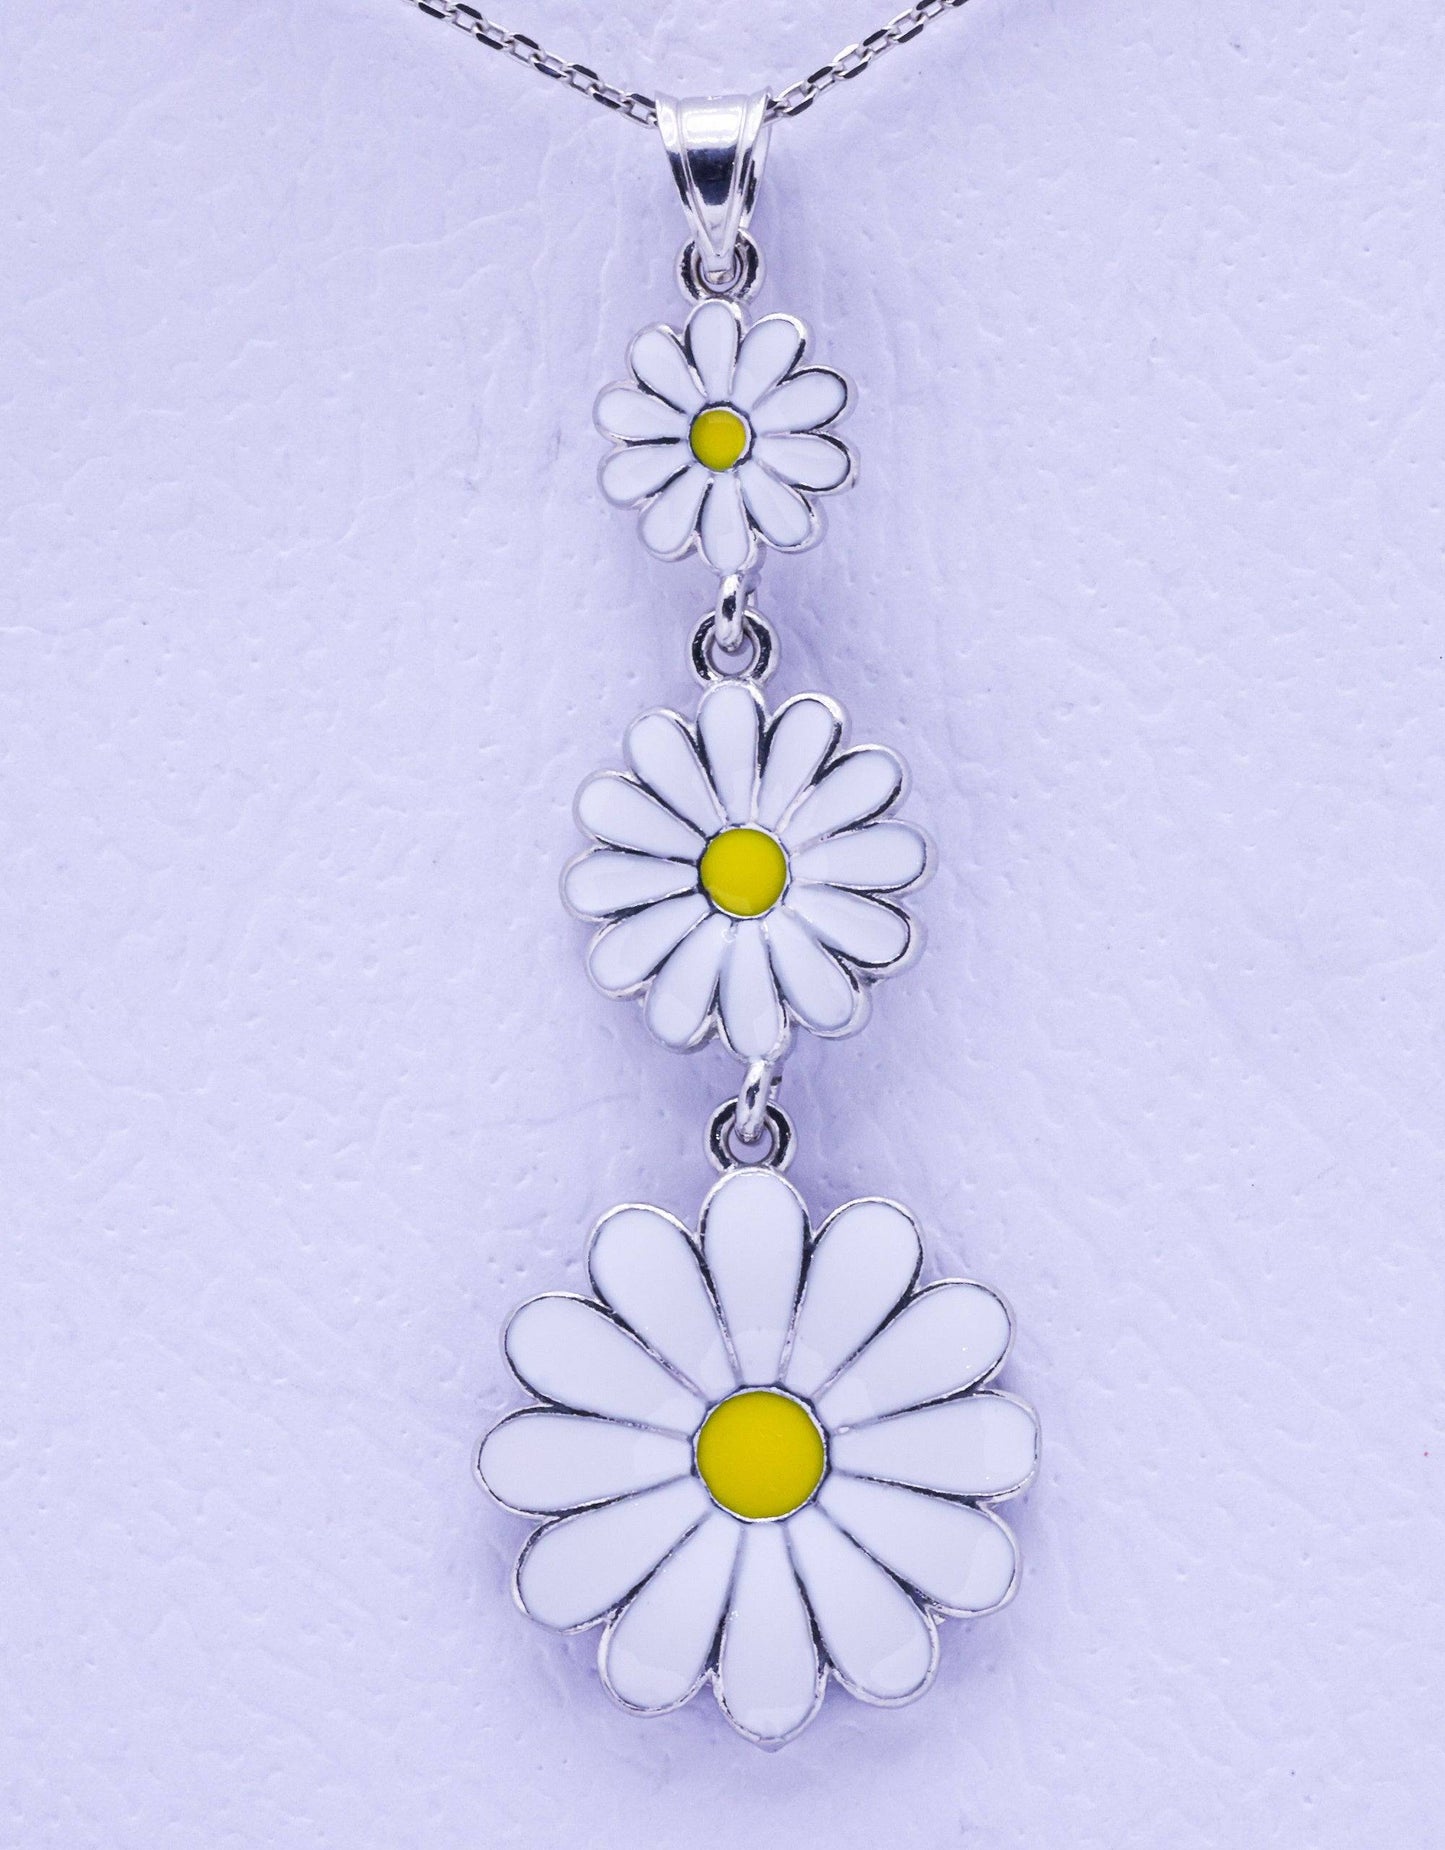 Sunflower Sterling Silver Necklace - 6G, 35CM